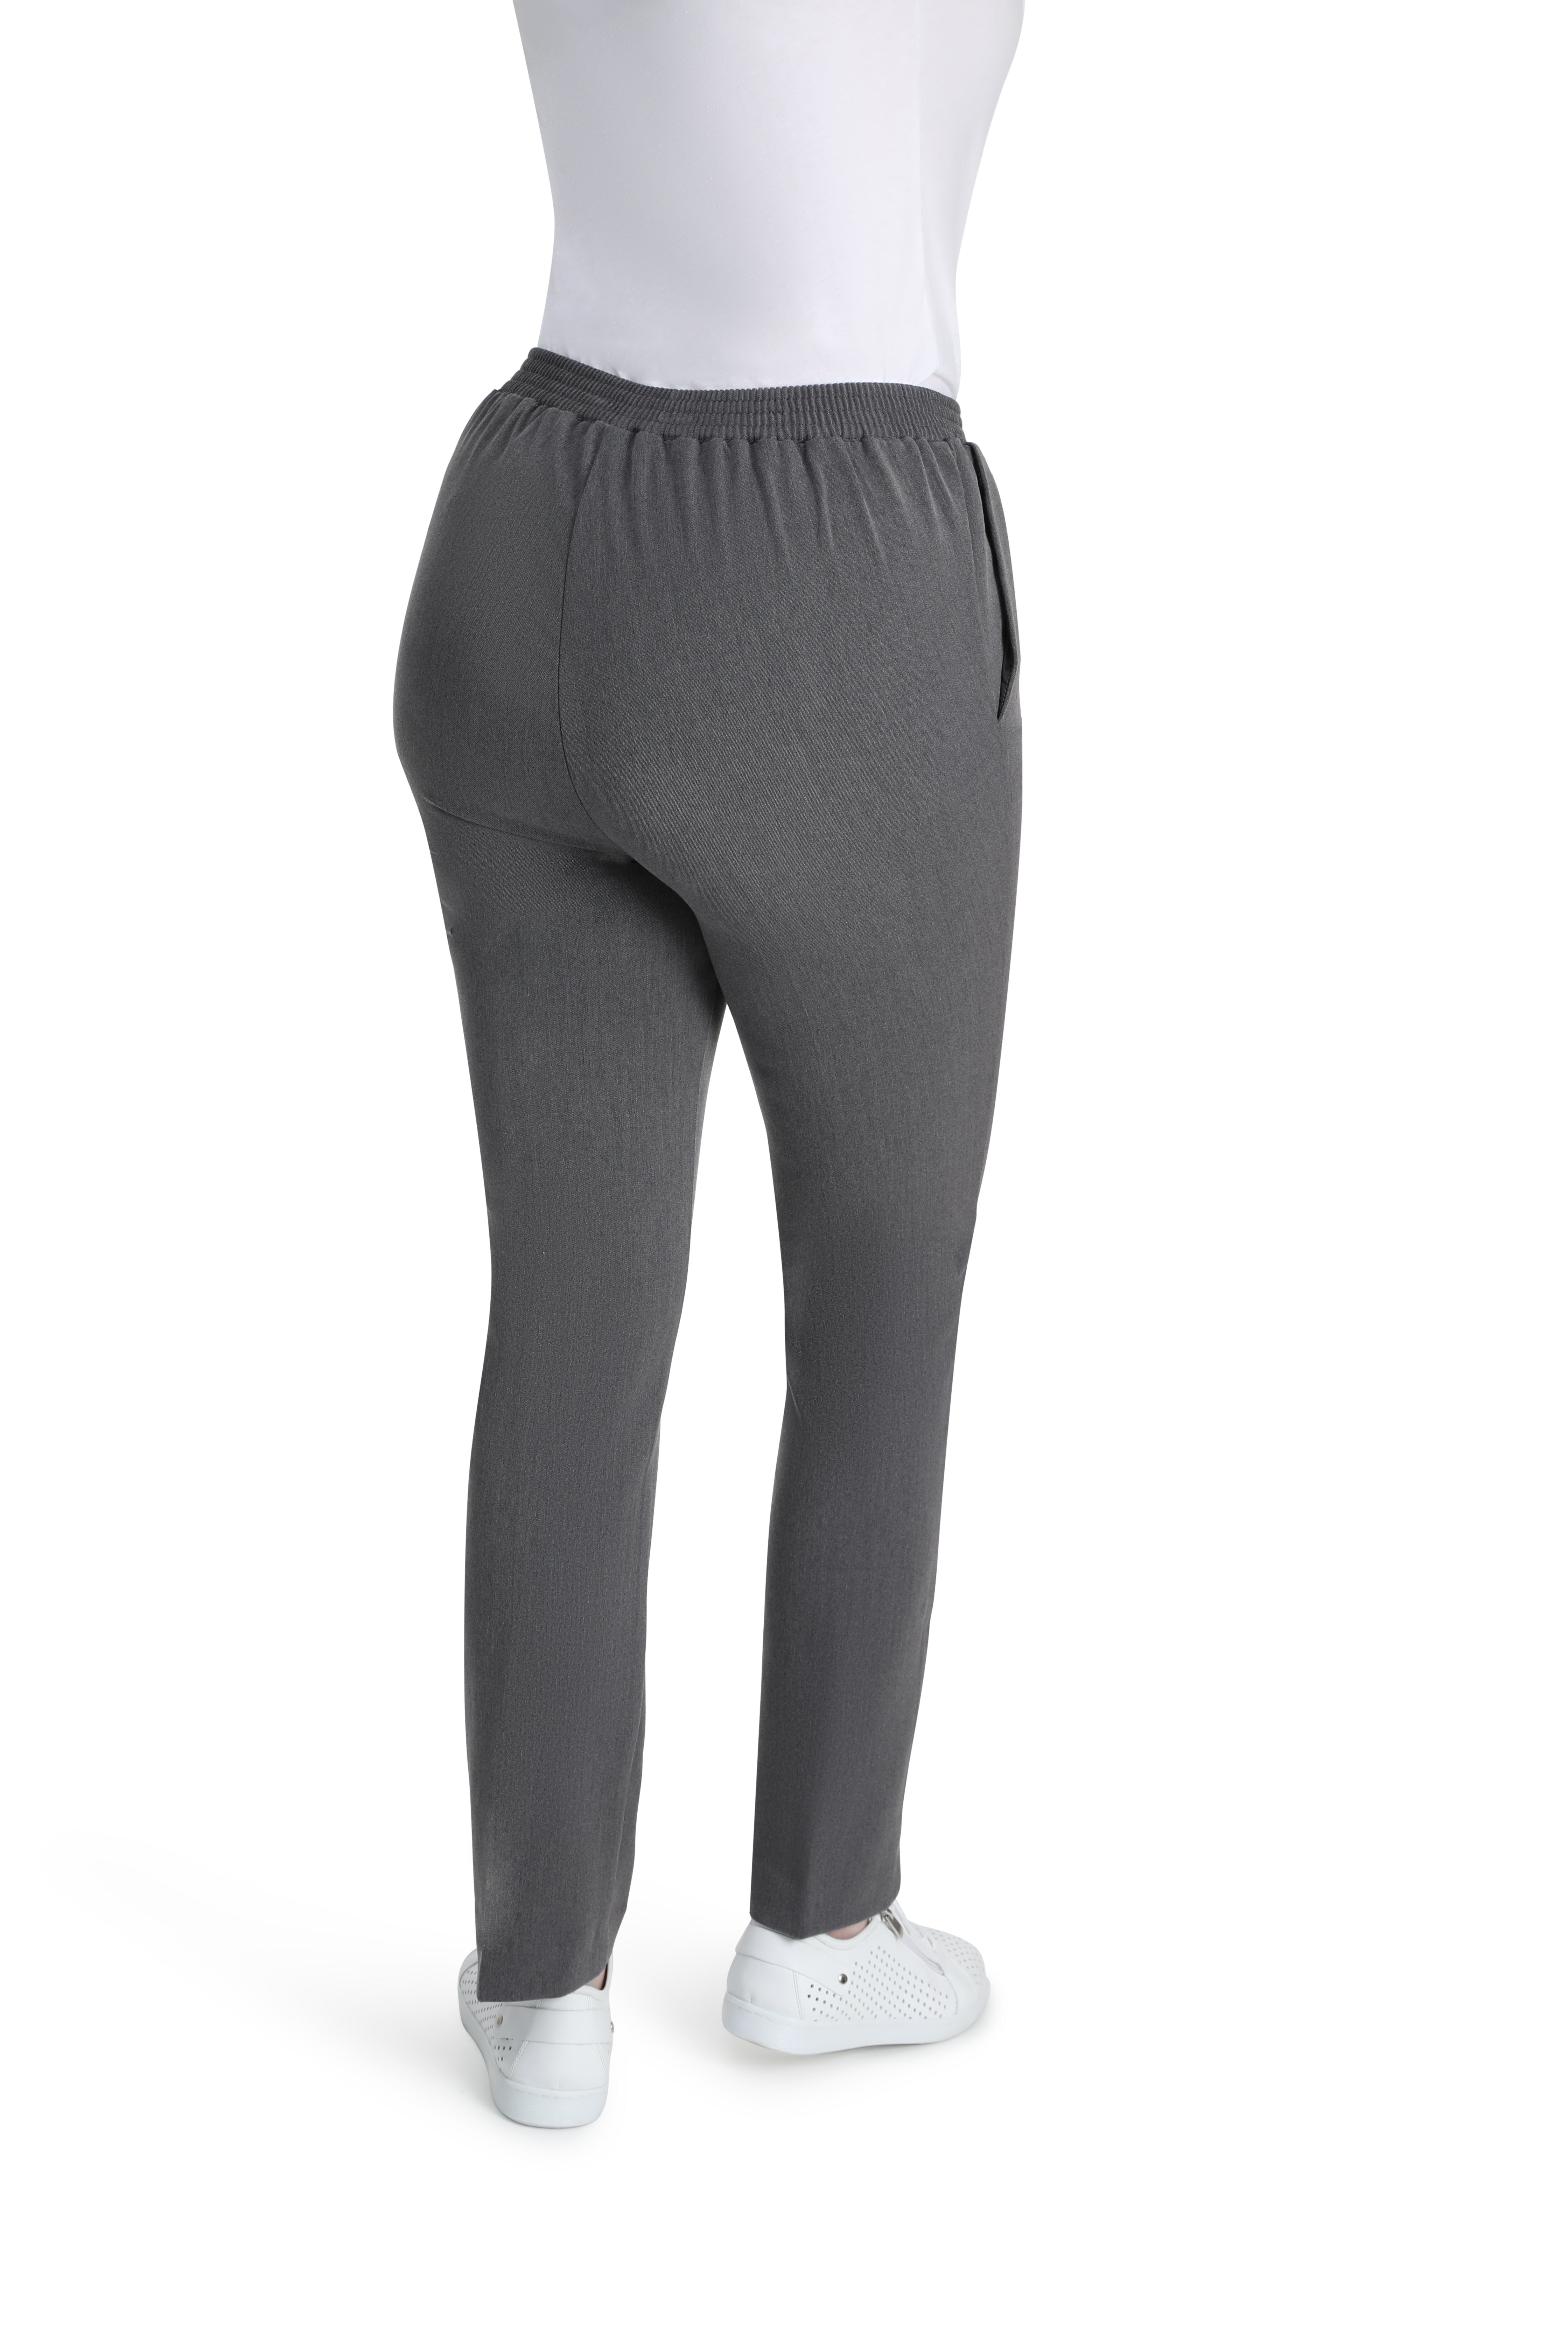 https://www.carolineeve.co.nz/content/products/short-pant-ruby-fit-tapered-leg-34-ewaist-angle-pkts-il-72cm-pewter-3-9161rr.jpg